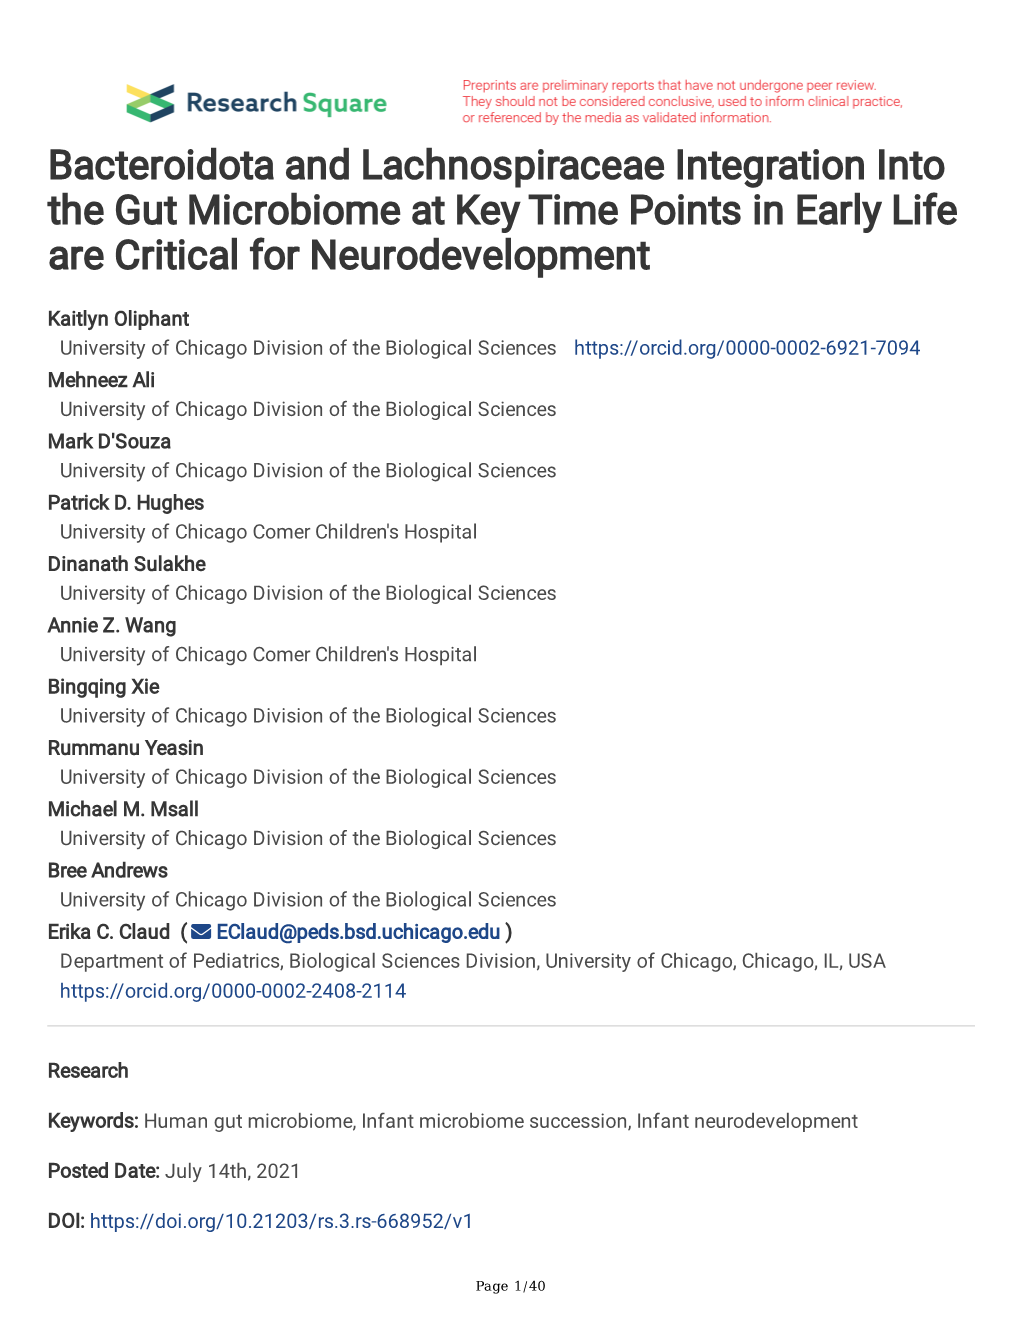 Bacteroidota and Lachnospiraceae Integration Into the Gut Microbiome at Key Time Points in Early Life Are Critical for Neurodevelopment